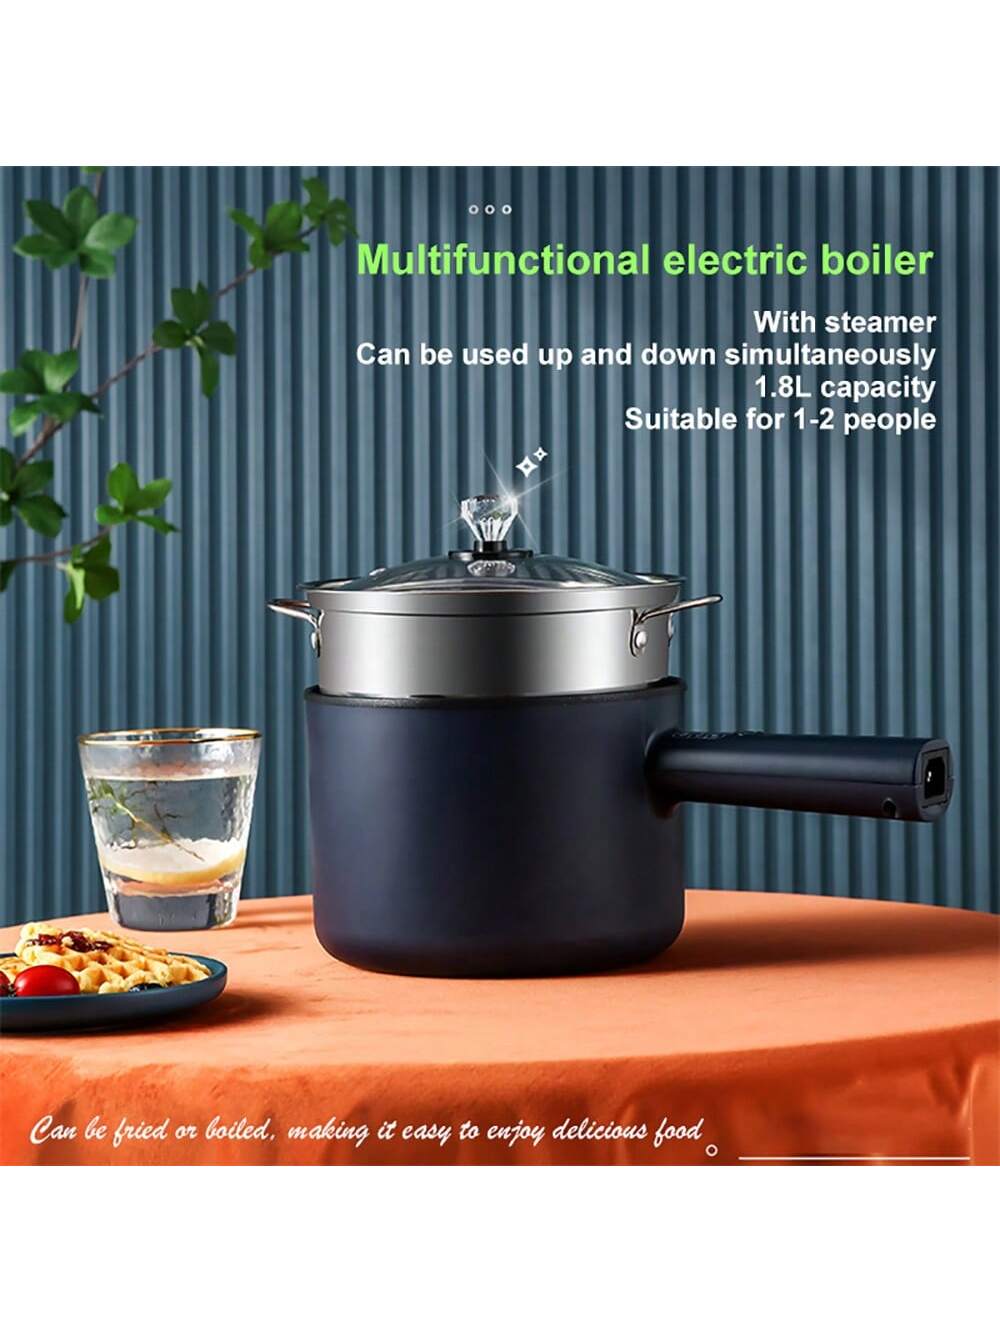 Multifunctional Electric Cooking Pot With Steamer, Non-stick Electric Fry Pan, 1-2 Person Mini Hot Pot Rice Cooker For Dormitory Student, Portable Outdoor Camping Heating Pot-Royal Blue-1